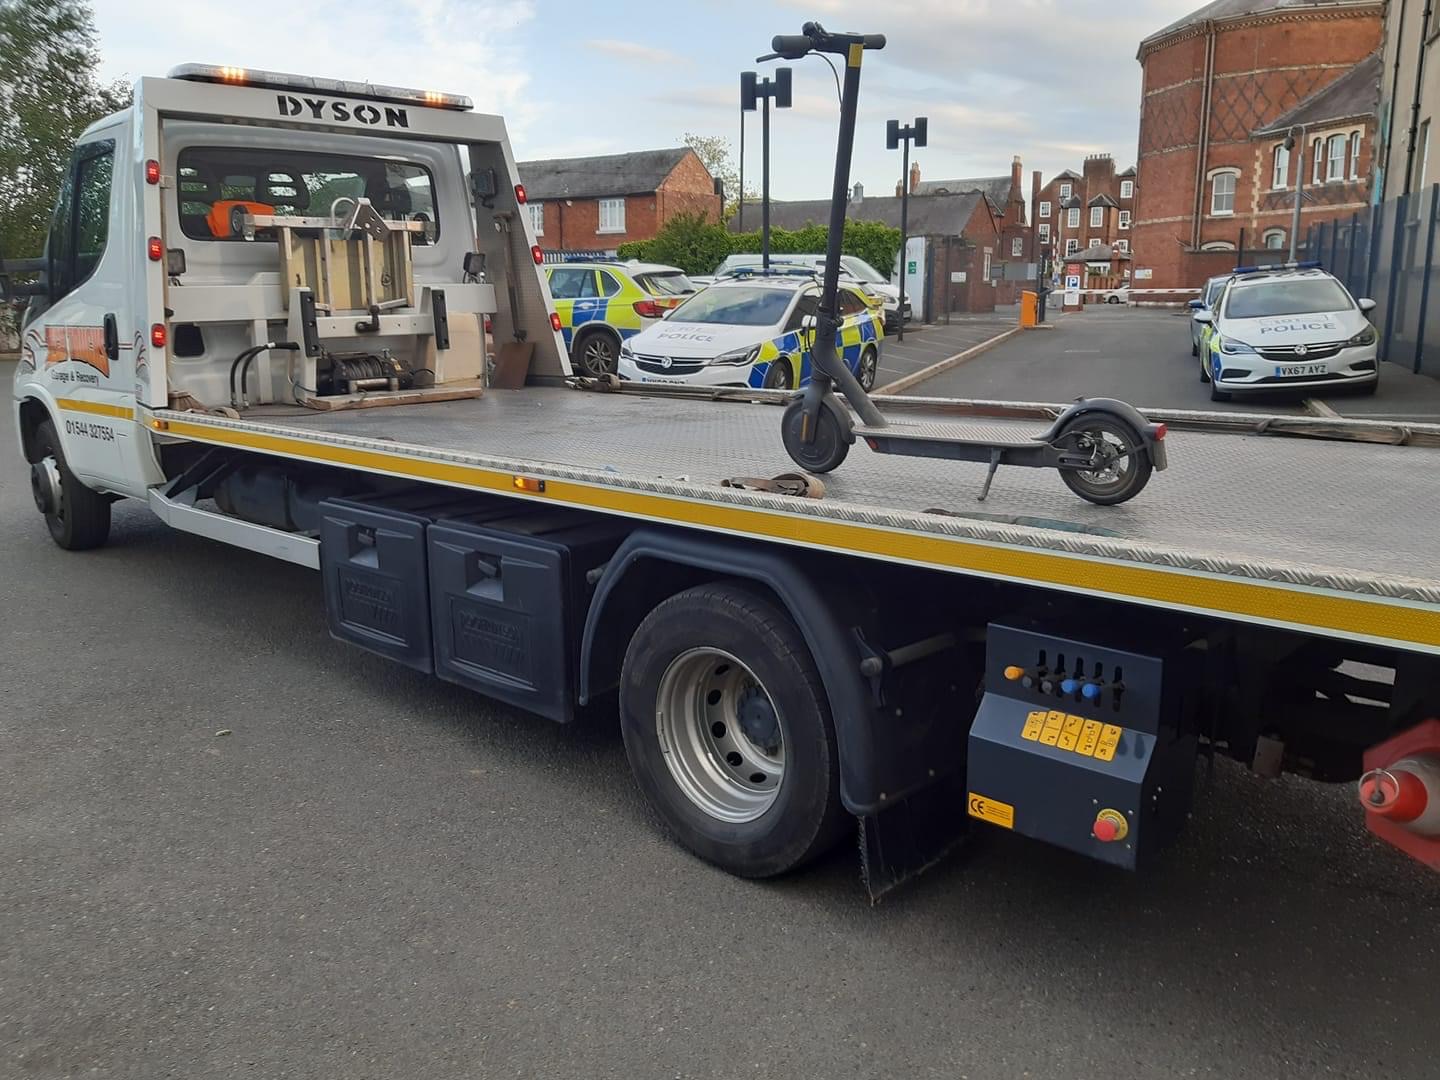 NEWS | 12-year-old’s electric scooter that was purchased at Halfords crushed after being seized by police